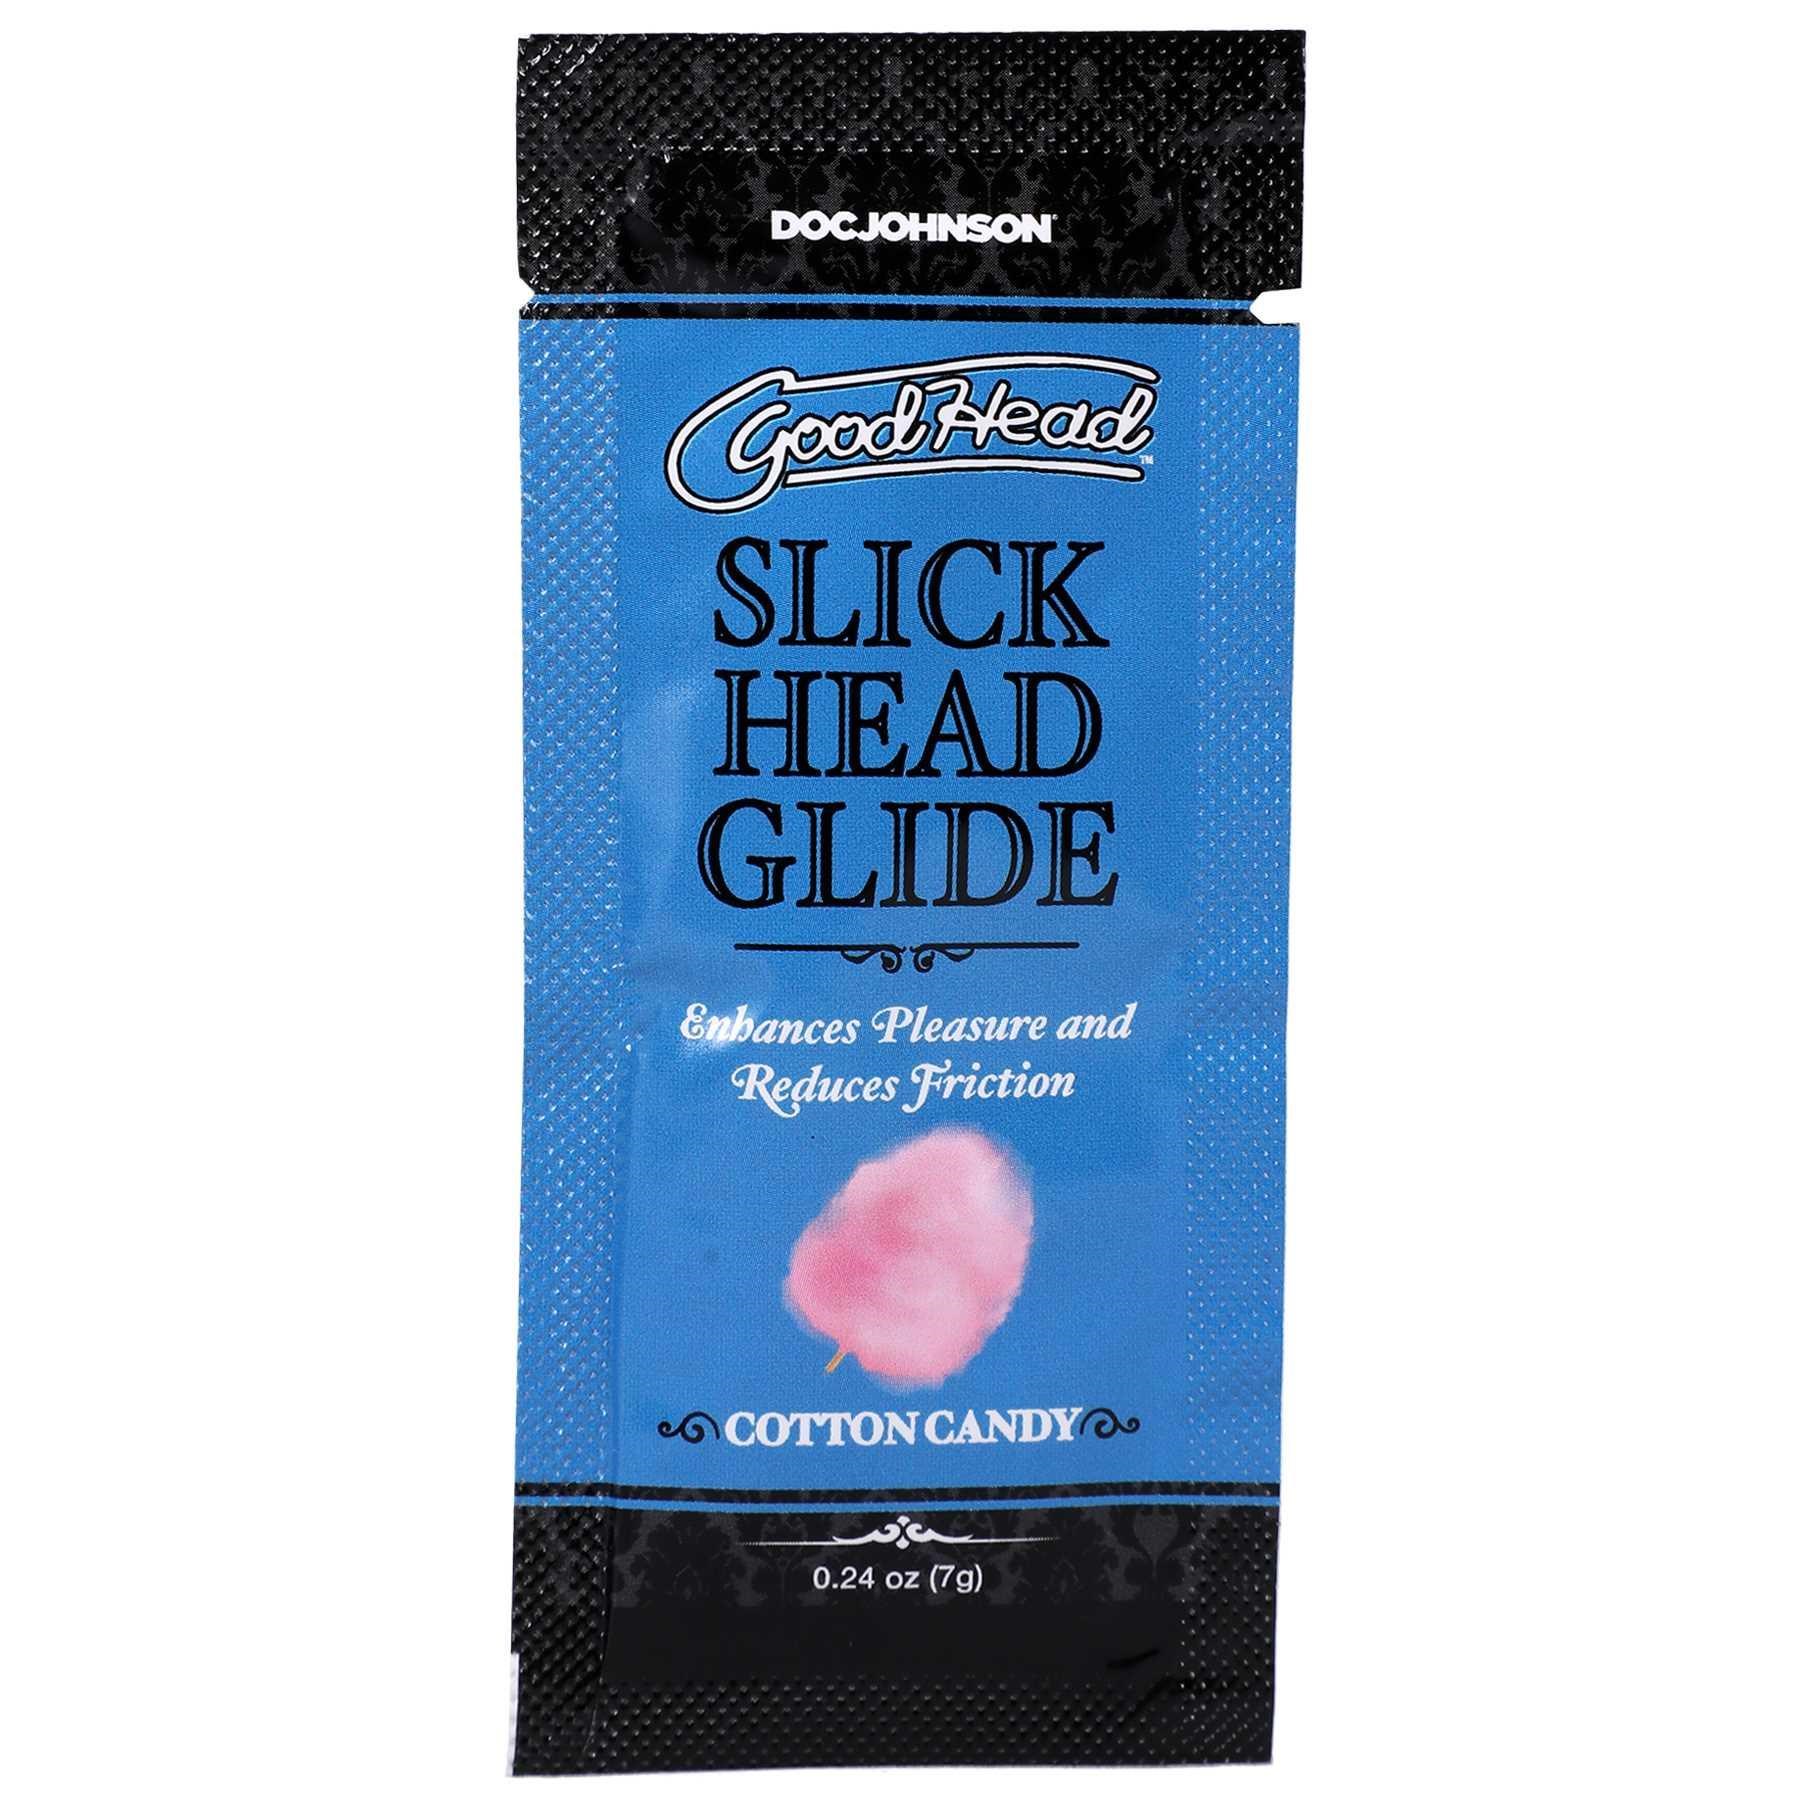 GoodHead - Slick Head Glide -cotton candy front of package-  0.24 oz.